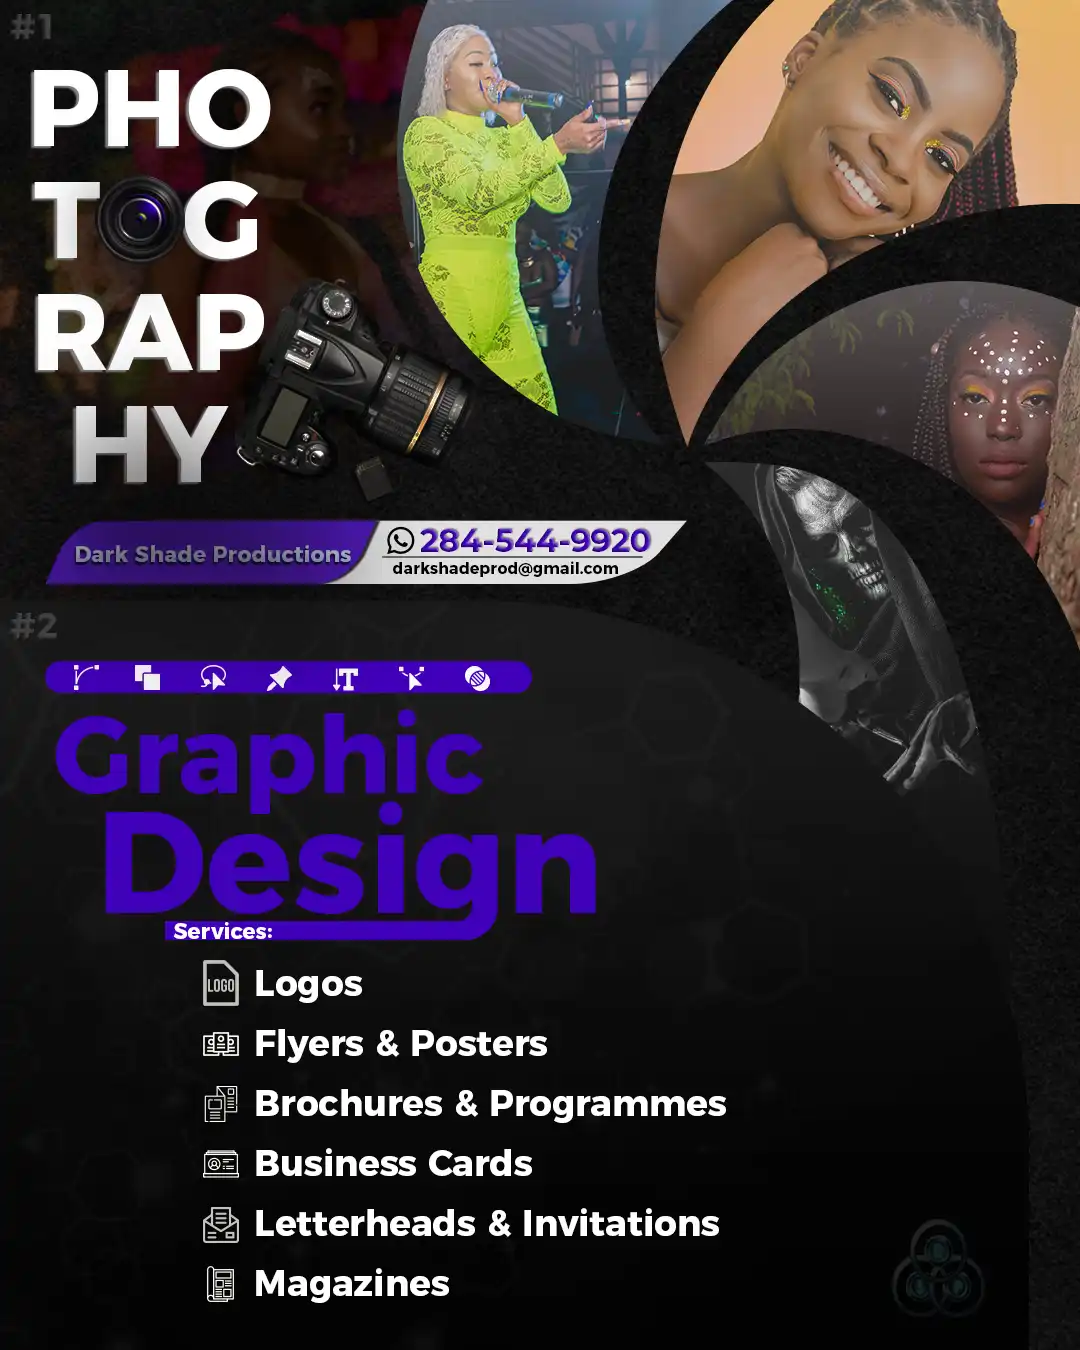 Image of "Graphics & Photography" flyer